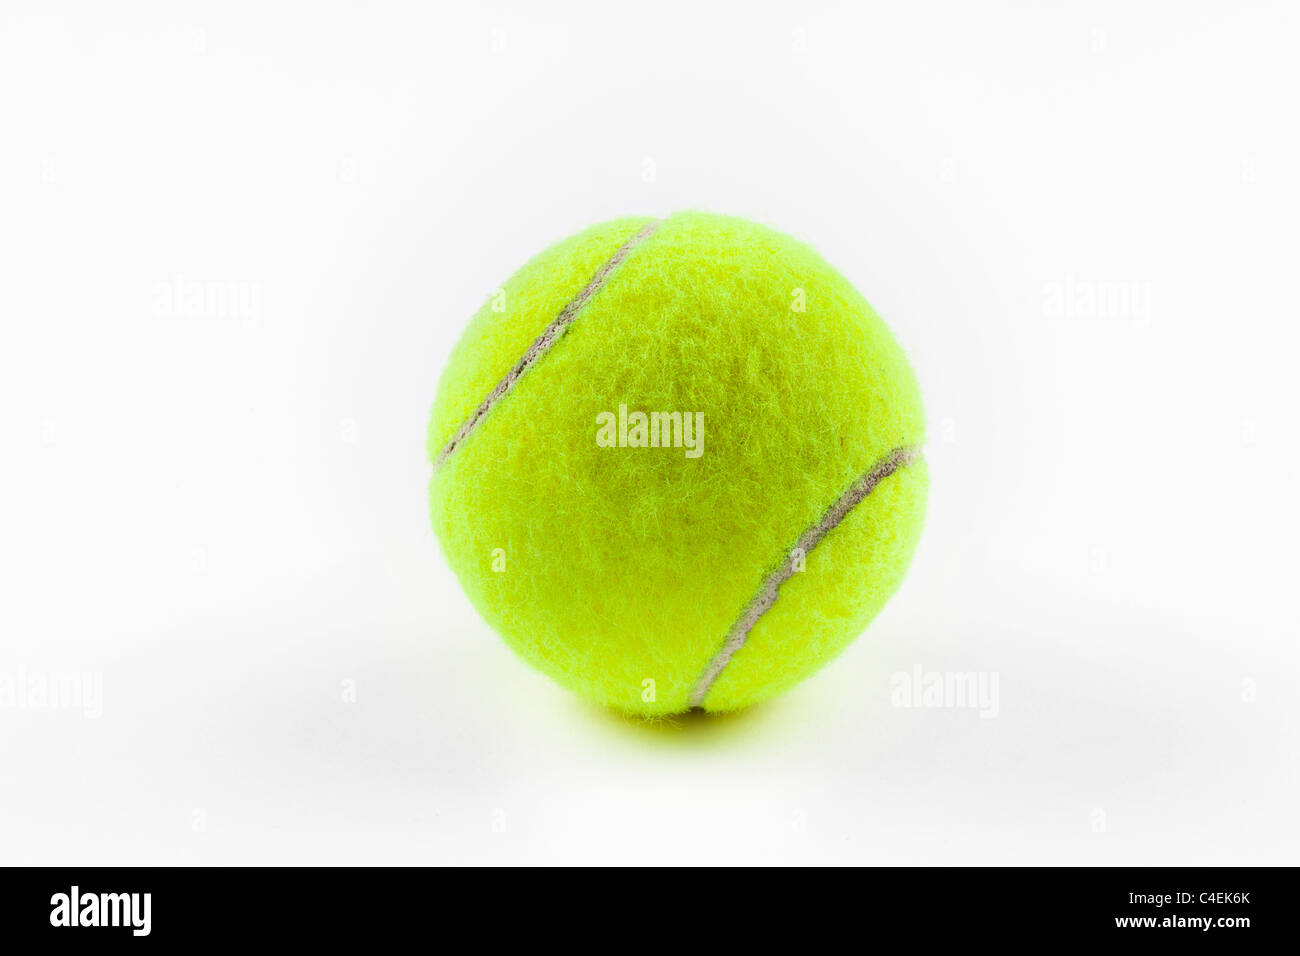 A yellow tennis ball against a white background Stock Photo